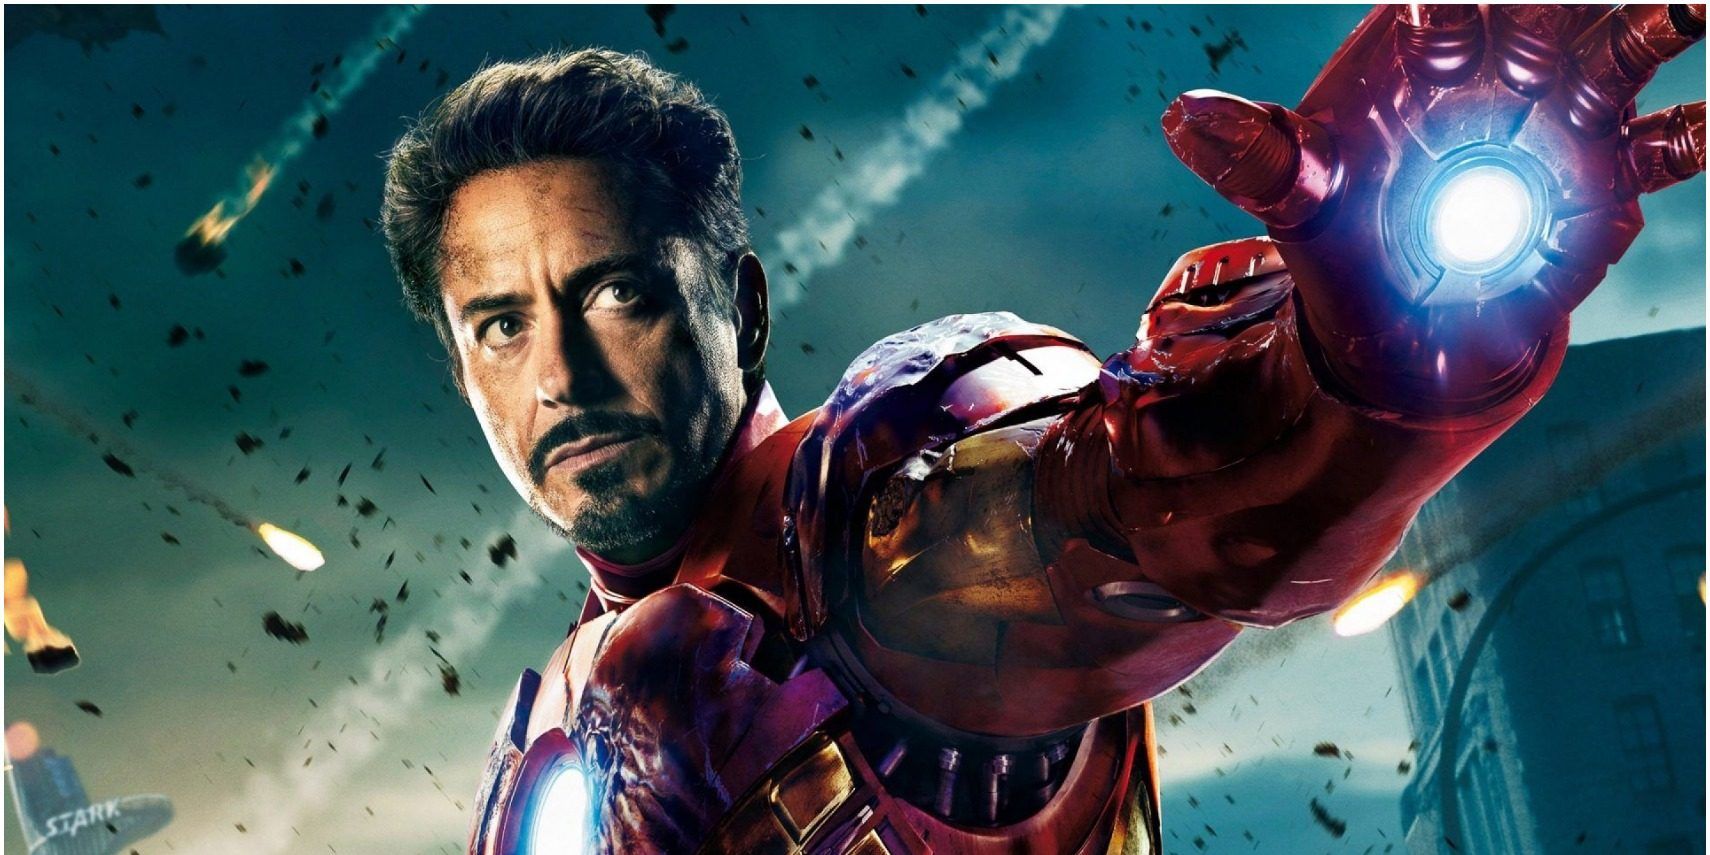 We're going to take that kind of guy and make him a hero: Iron Man